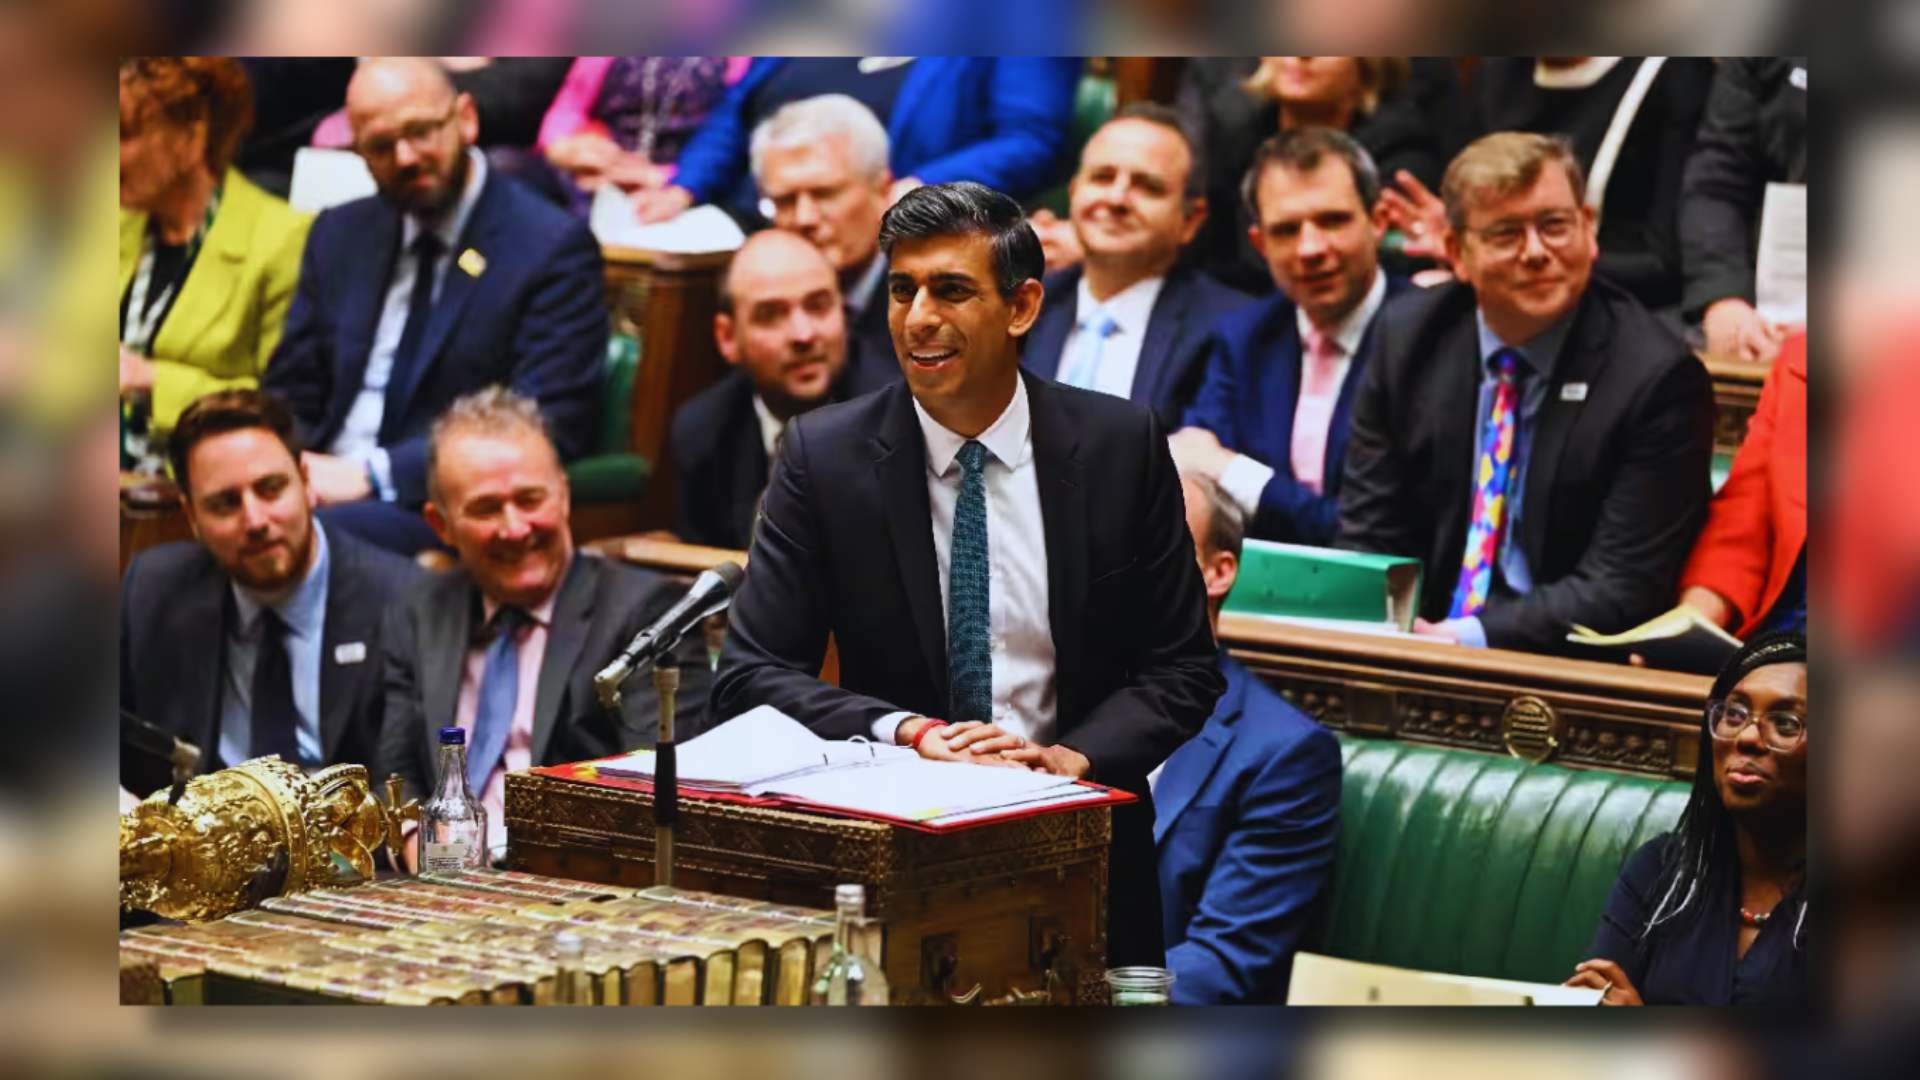 From The Bhagavad Gita To The King James Bible: Indian-Origin MPs’ Powerful Oath-Taking Moments In The UK’s House Of Commons